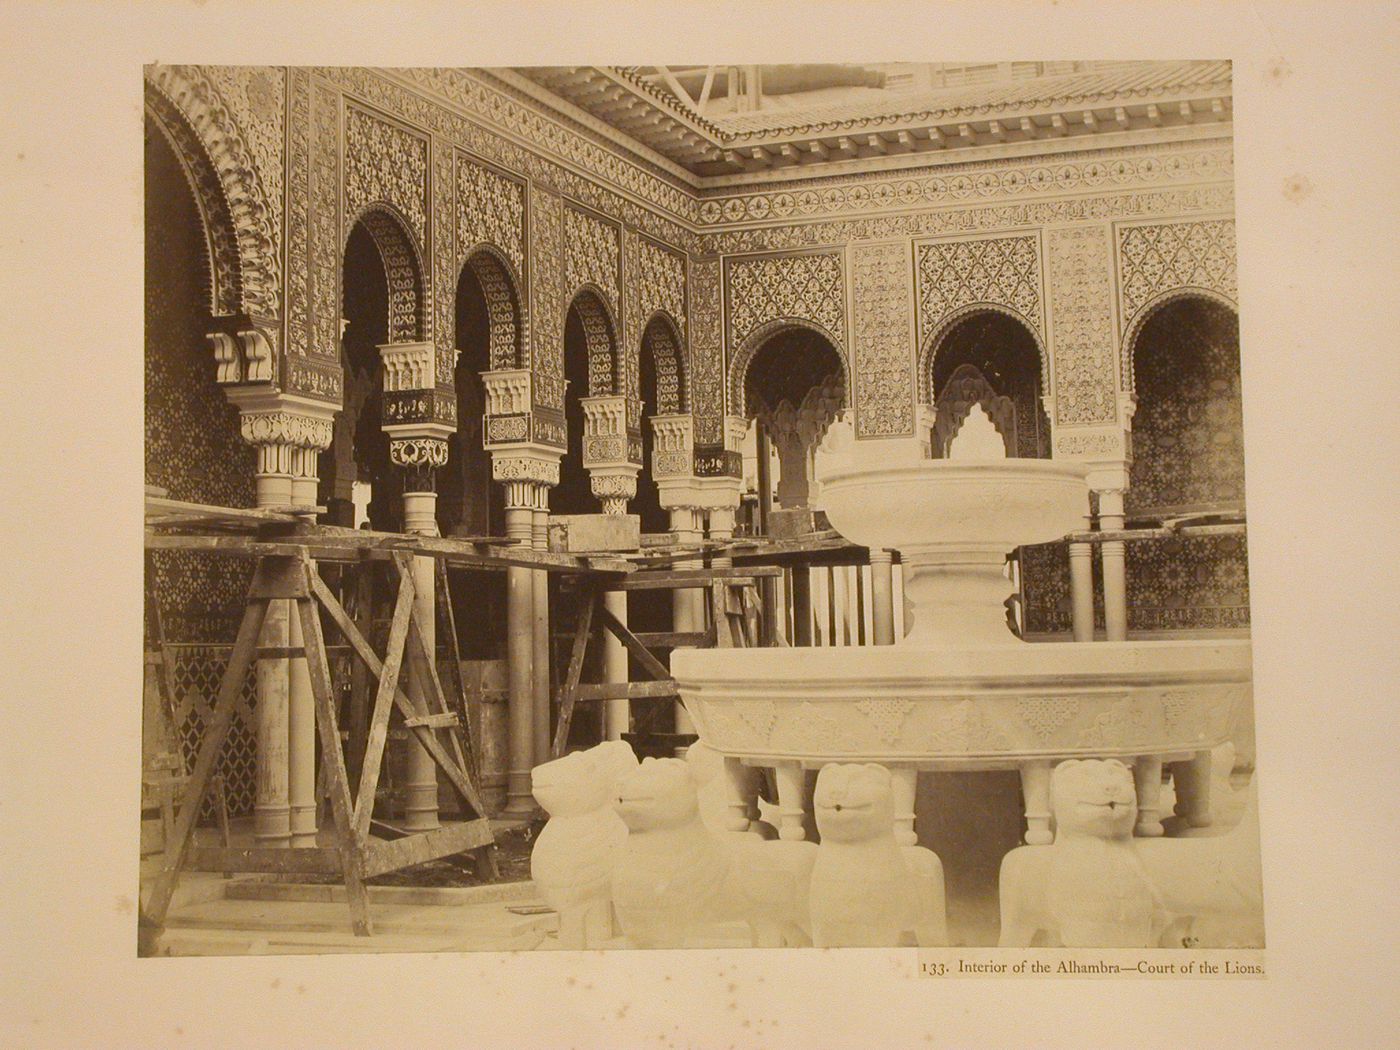 Court of the Lions, interior of the Alhambra, Crystal Palace, Sydenham, England